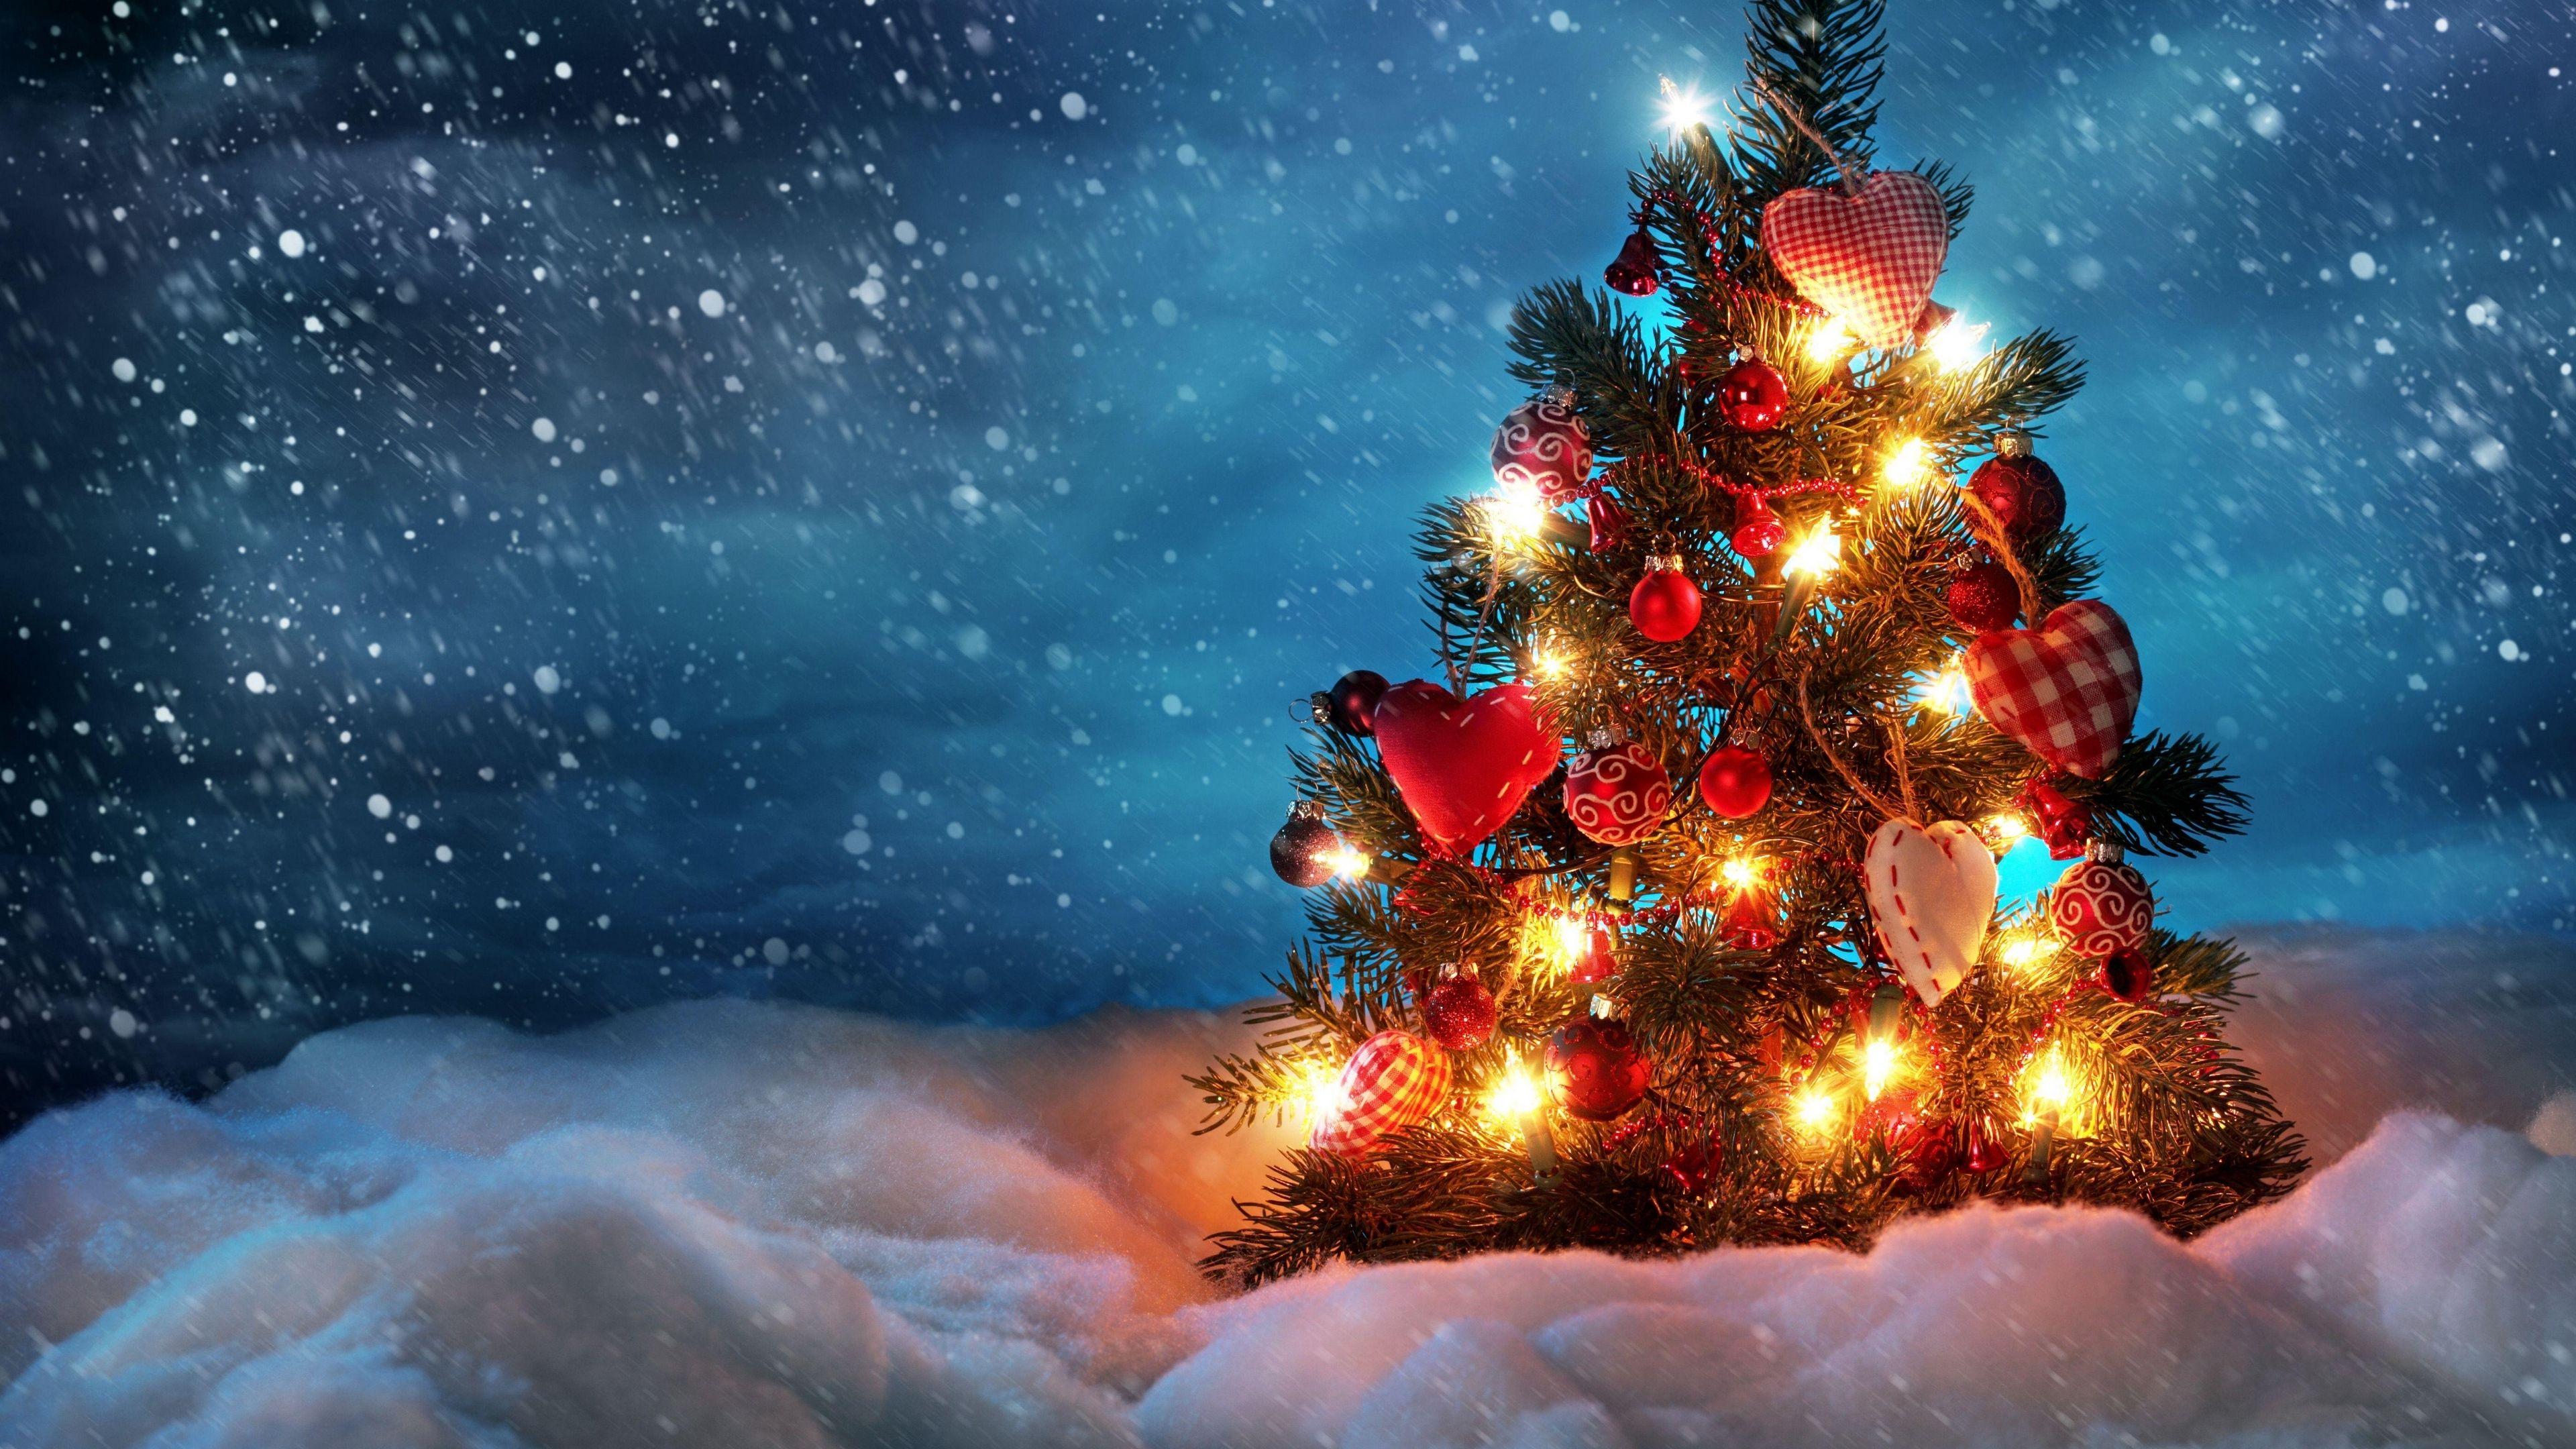 Download wallpaper 3840x2160 tree, new year, christmas, snow